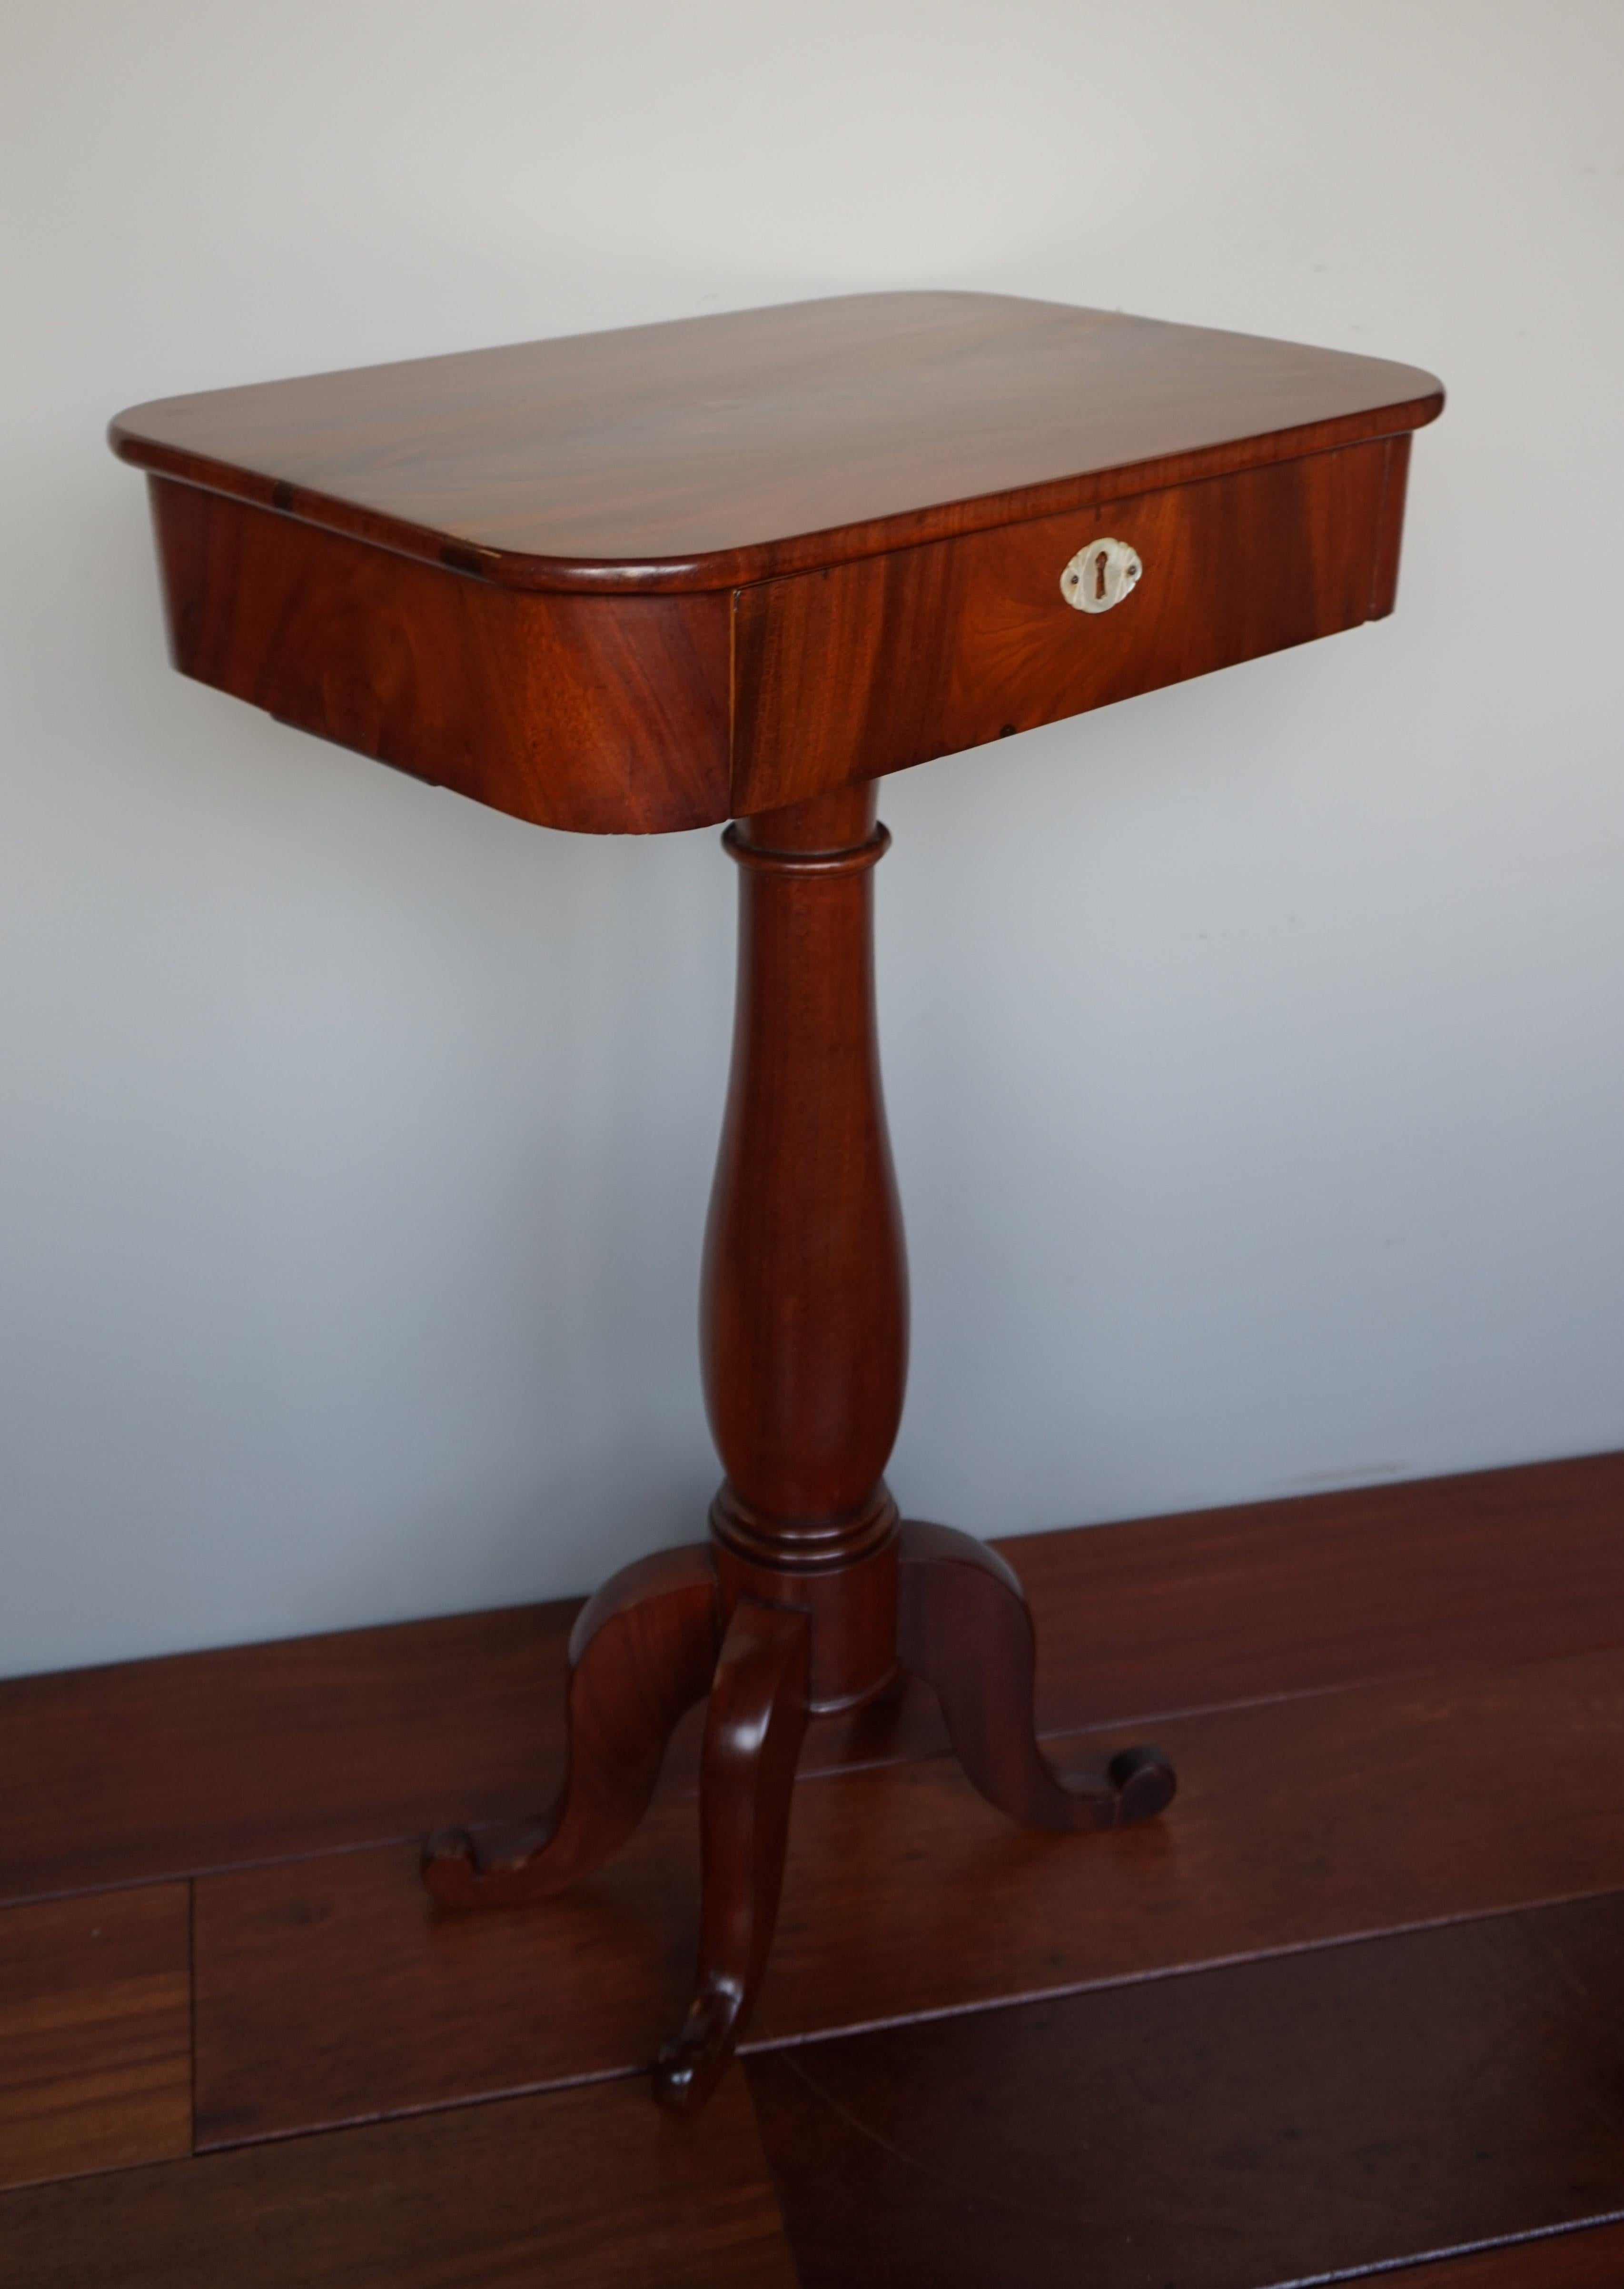 European Handmade Antique Nutwood Workman's Table / Sewing Cabinet / Side table w. Drawer For Sale